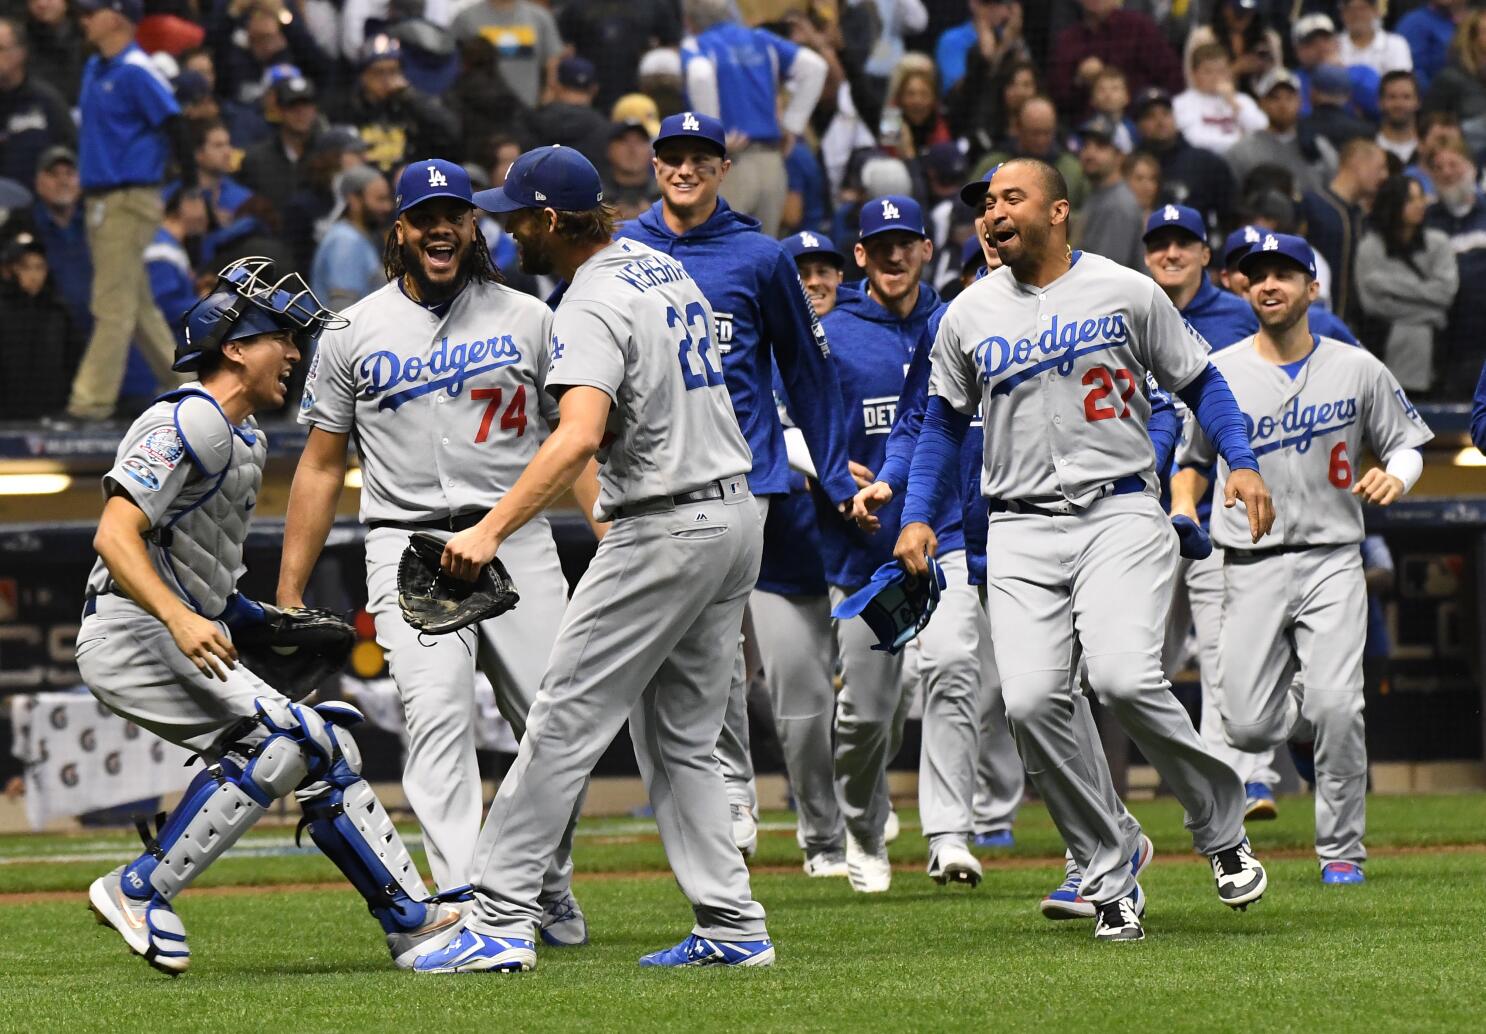 World Series 2017: How the Dodgers Won Game 6, Inning by Inning